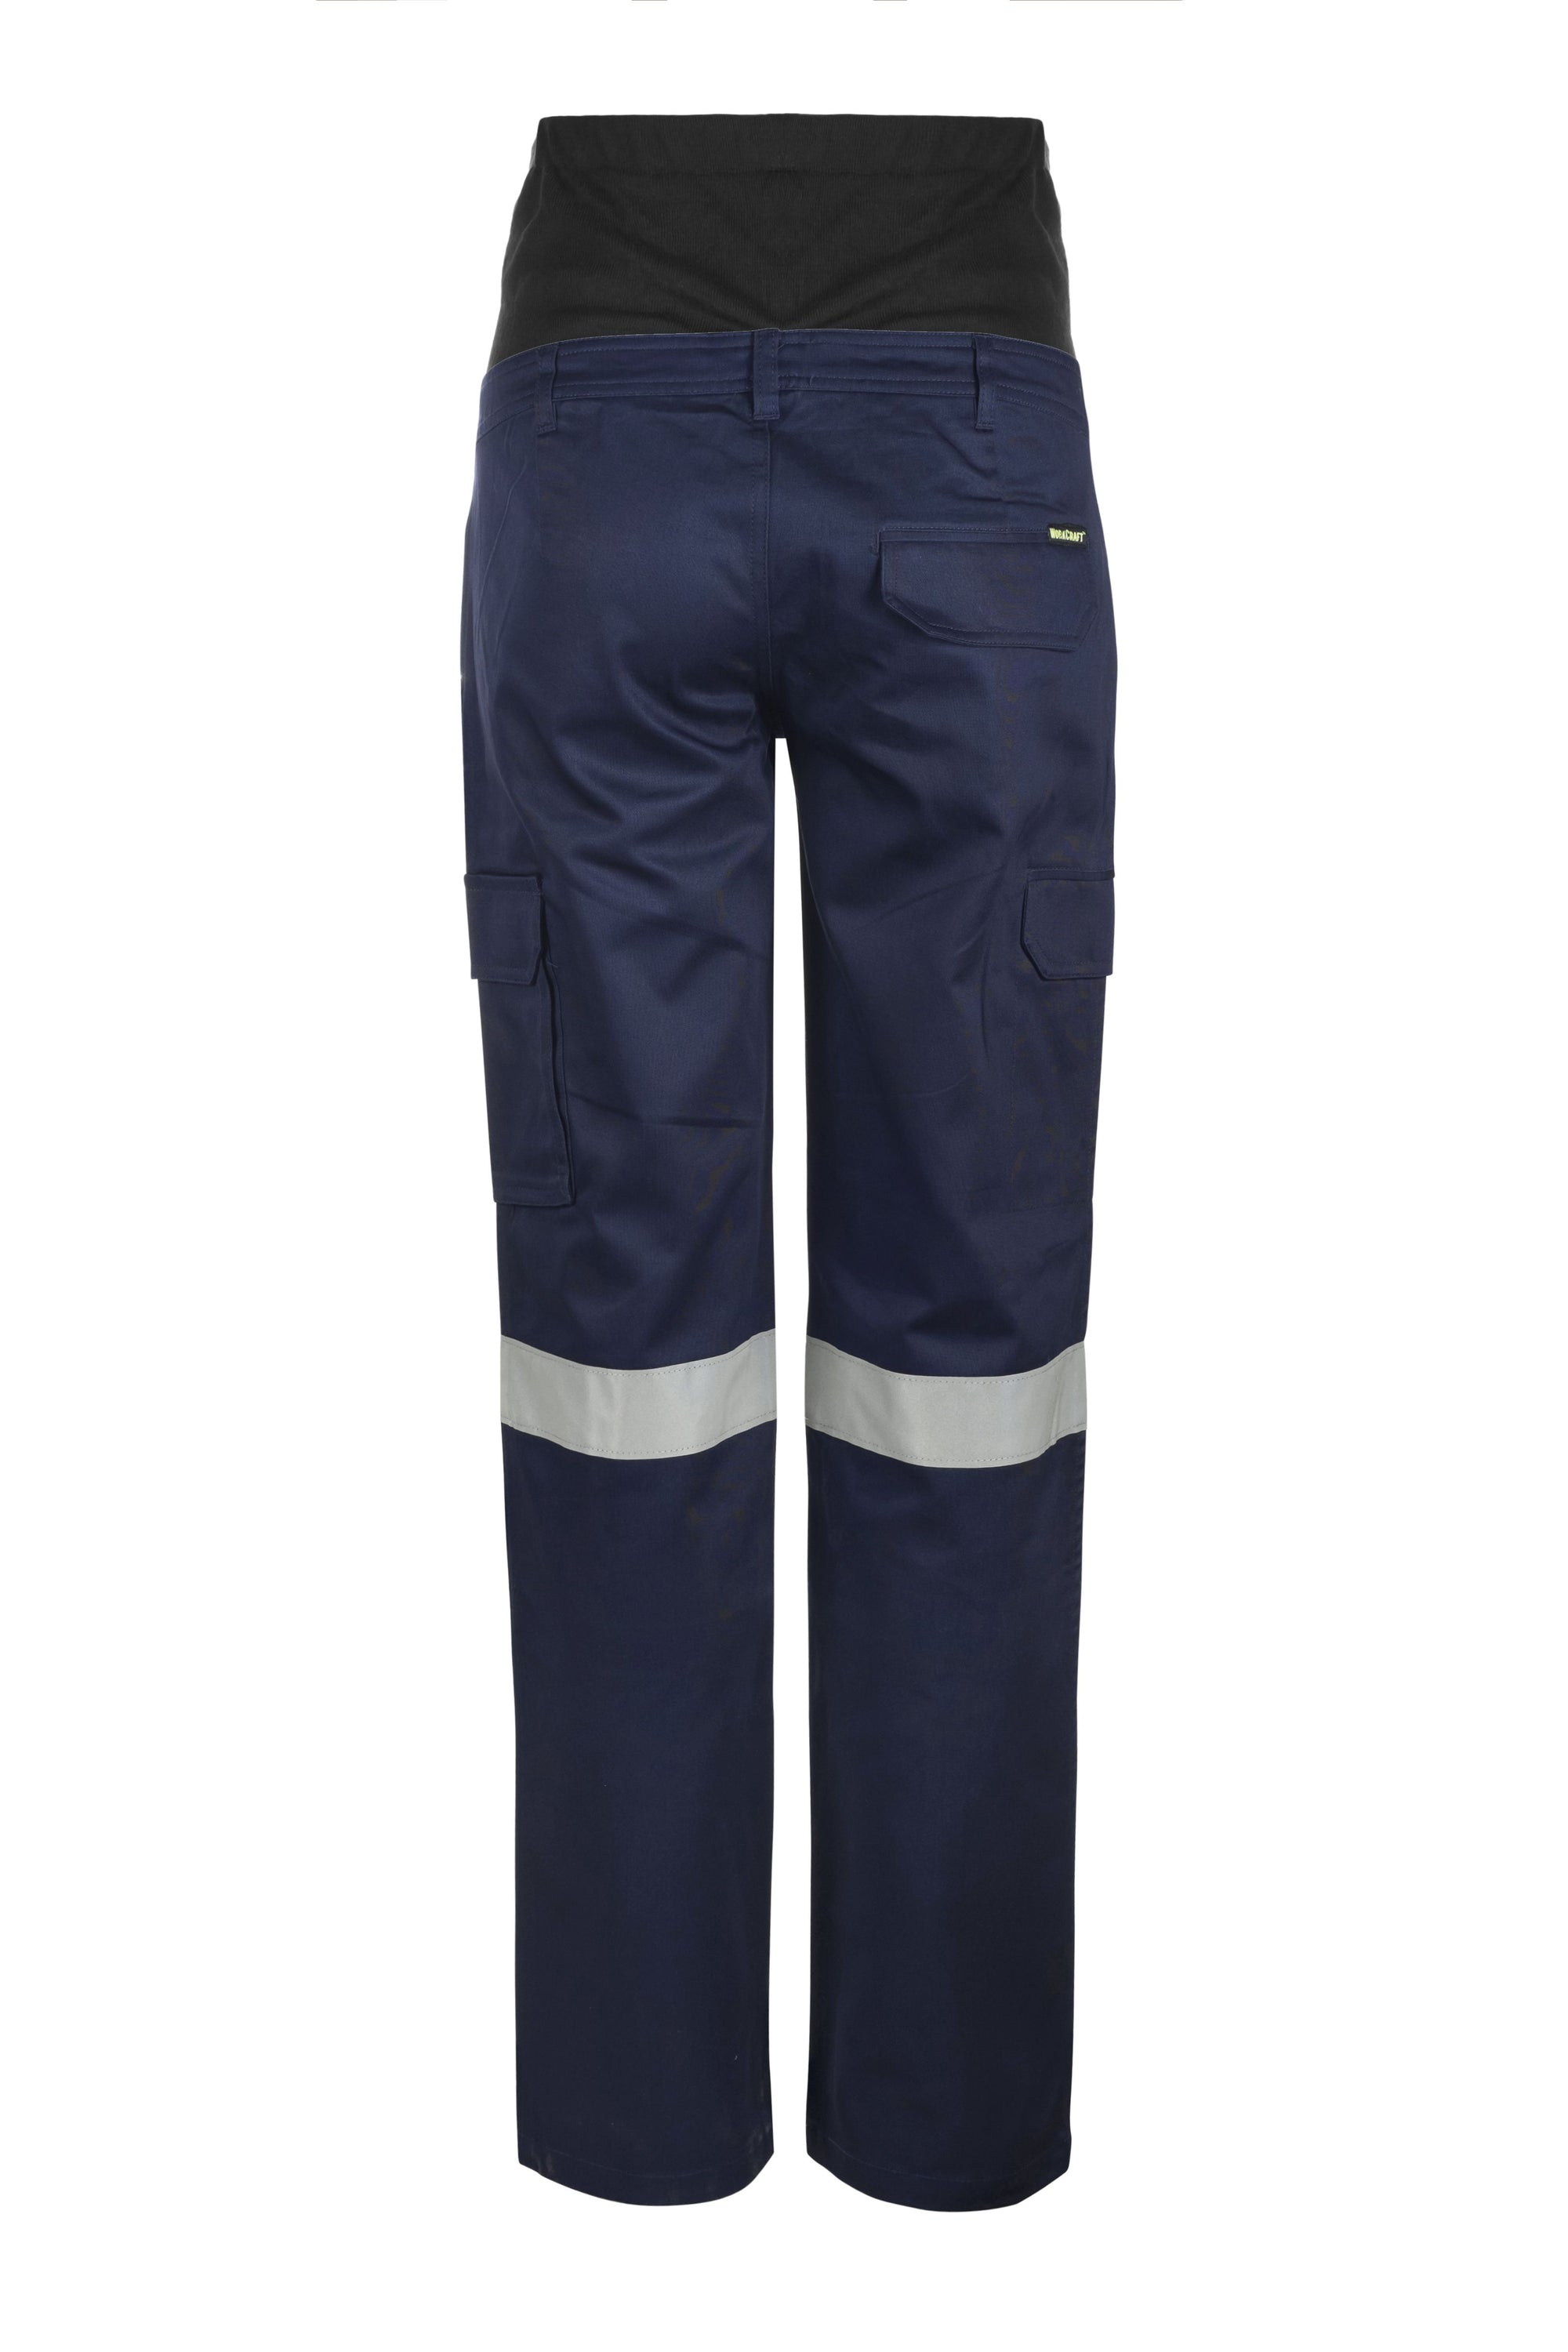 WorkCraft Womens Navy Taped Maternity Cargo Pants 245g 6